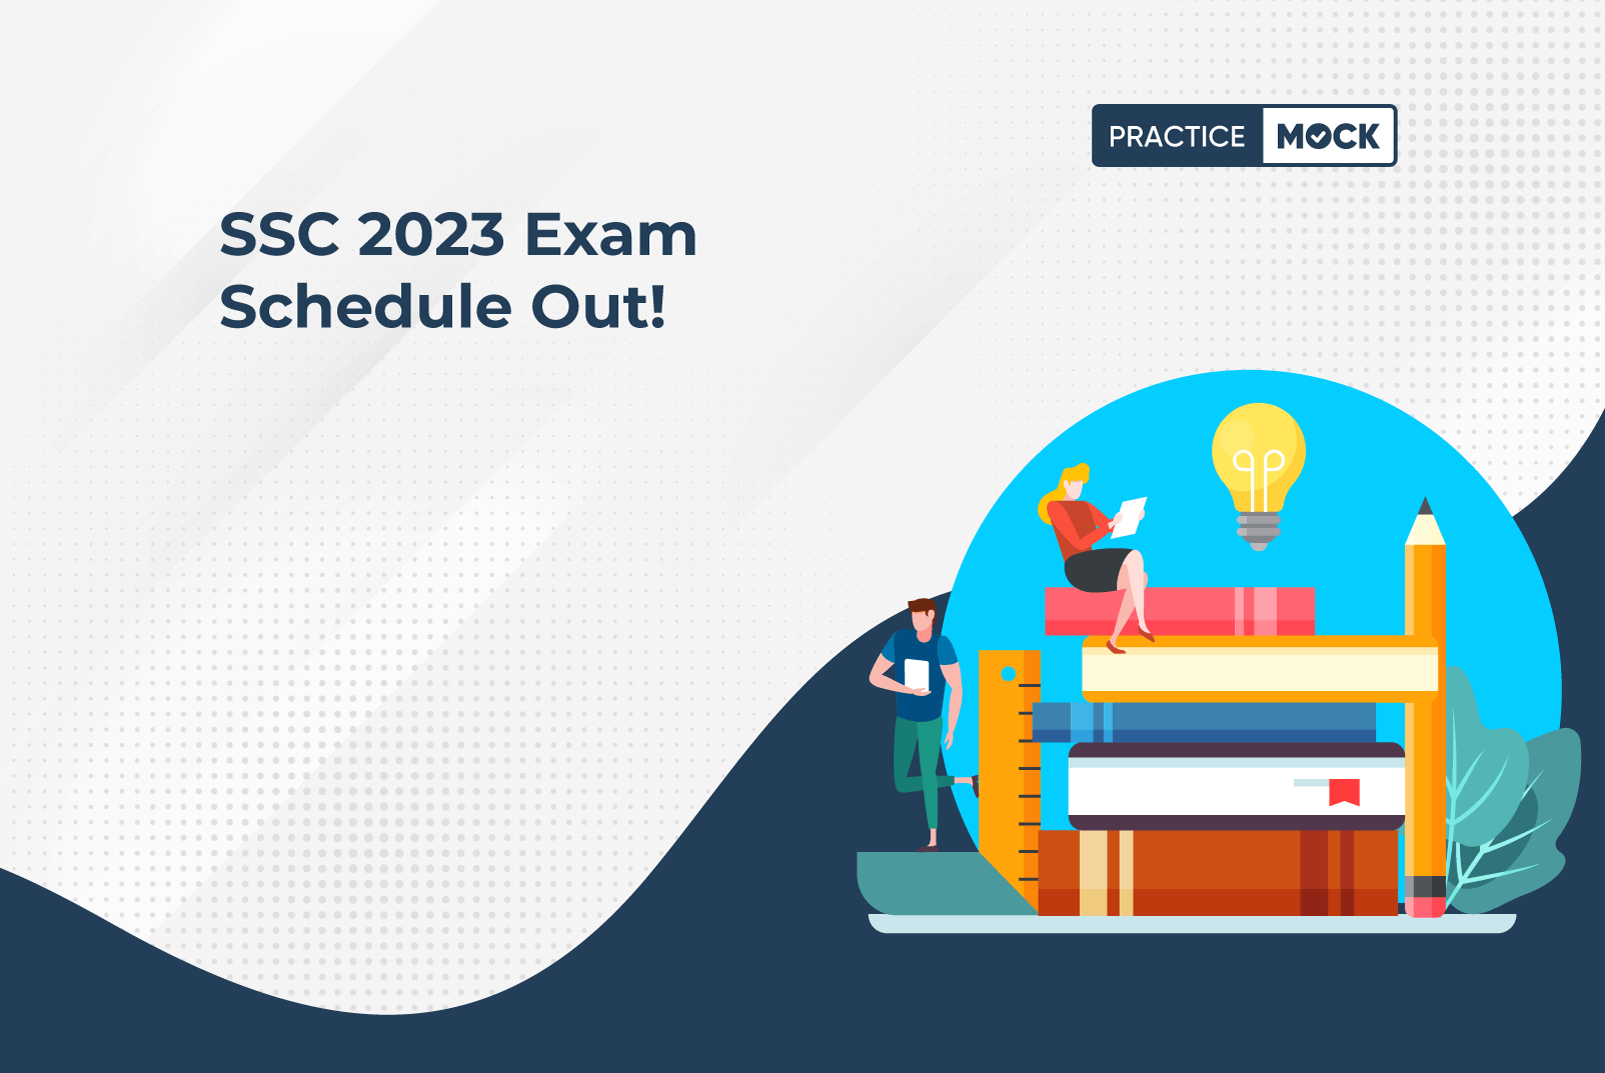 SSC 2023 Exam Schedule Out! (1)